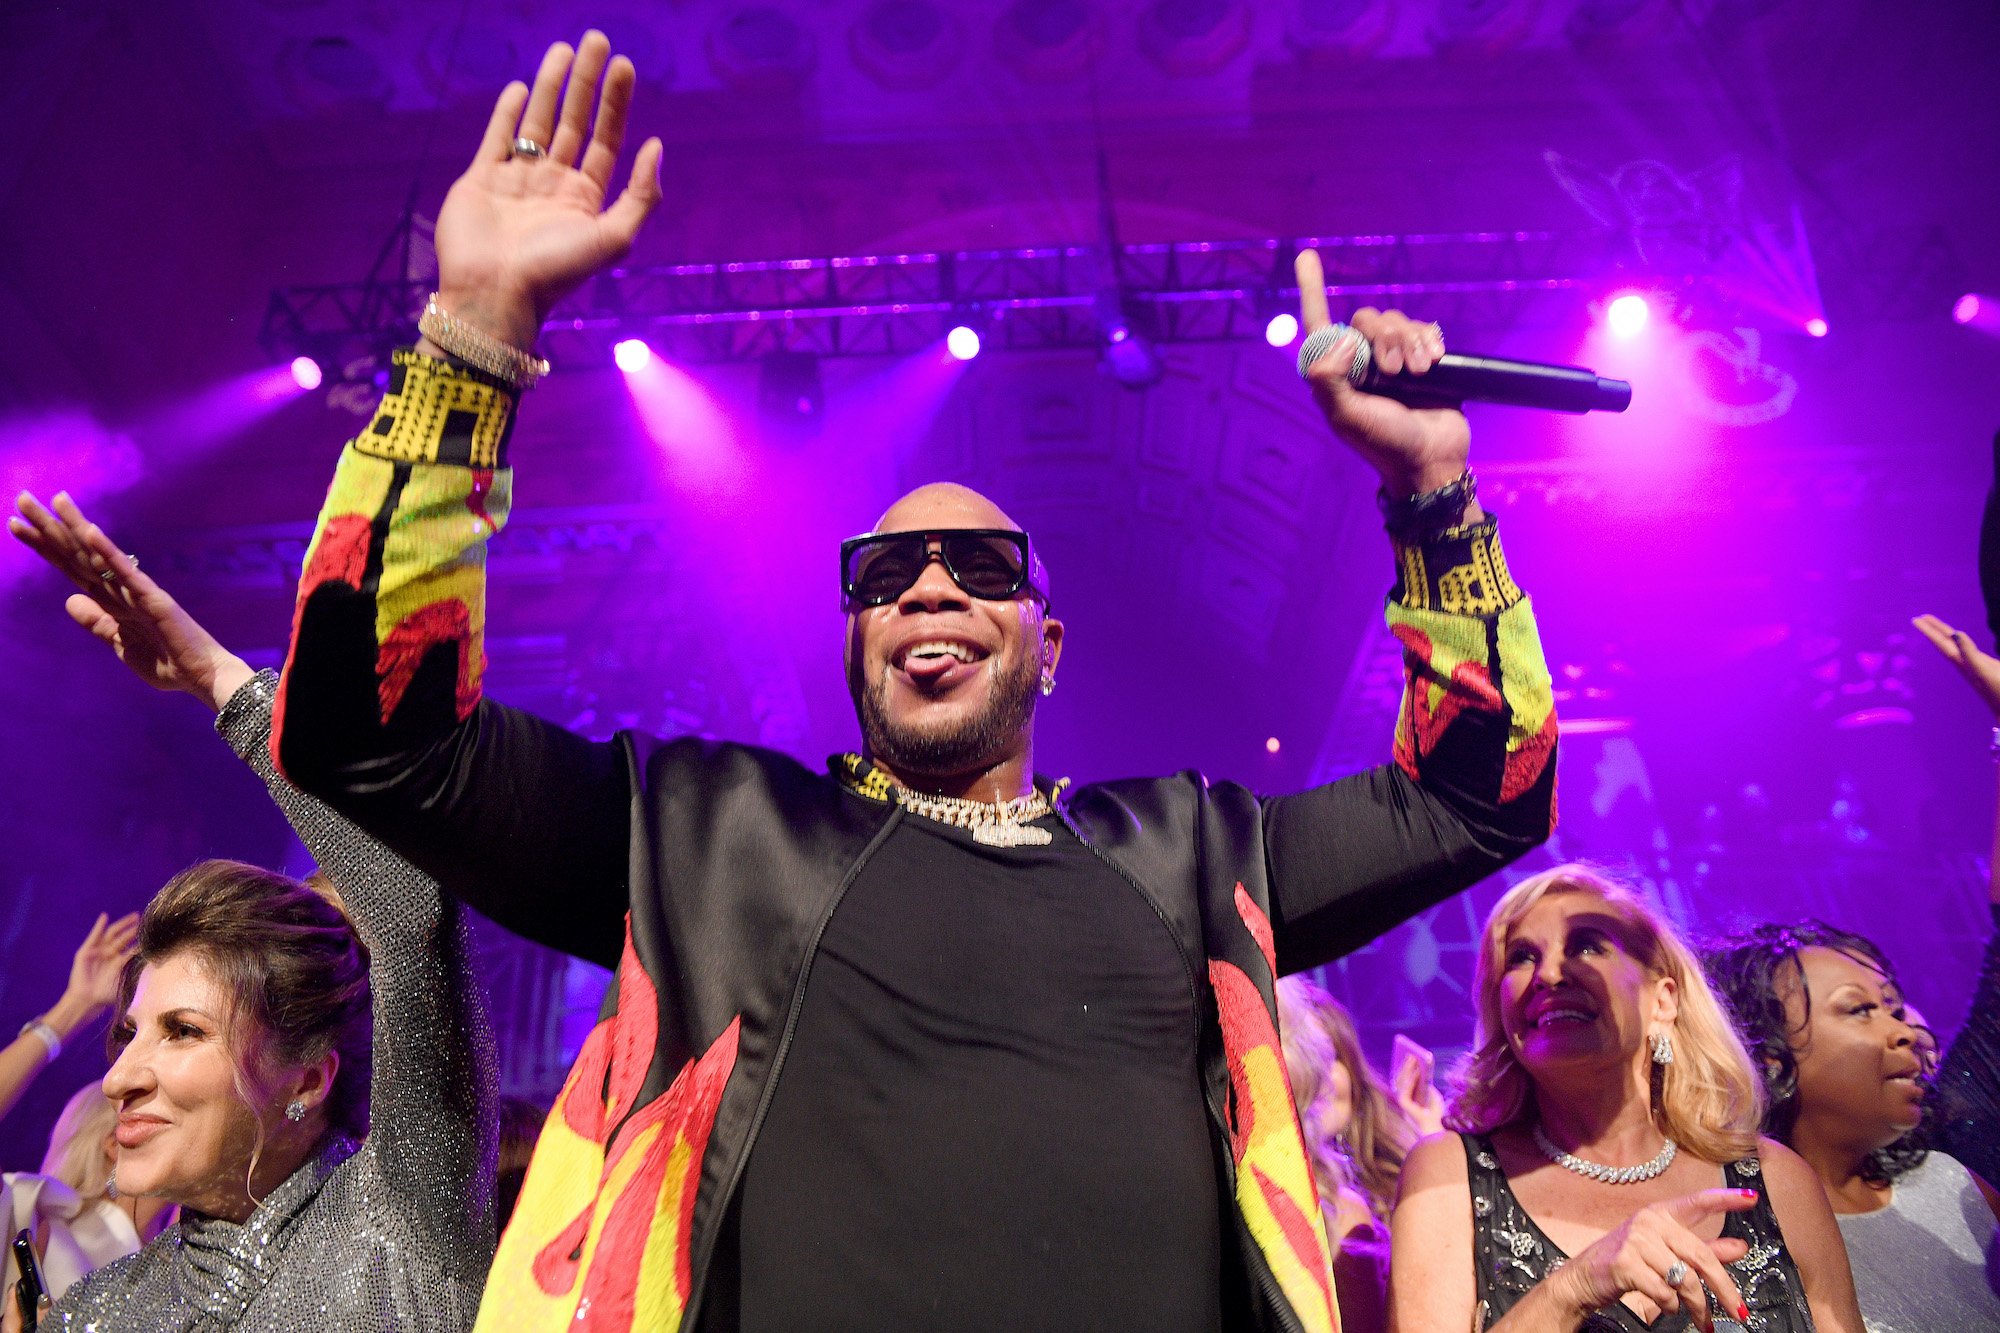 Flo Rida smiling with his hands up holding a mic